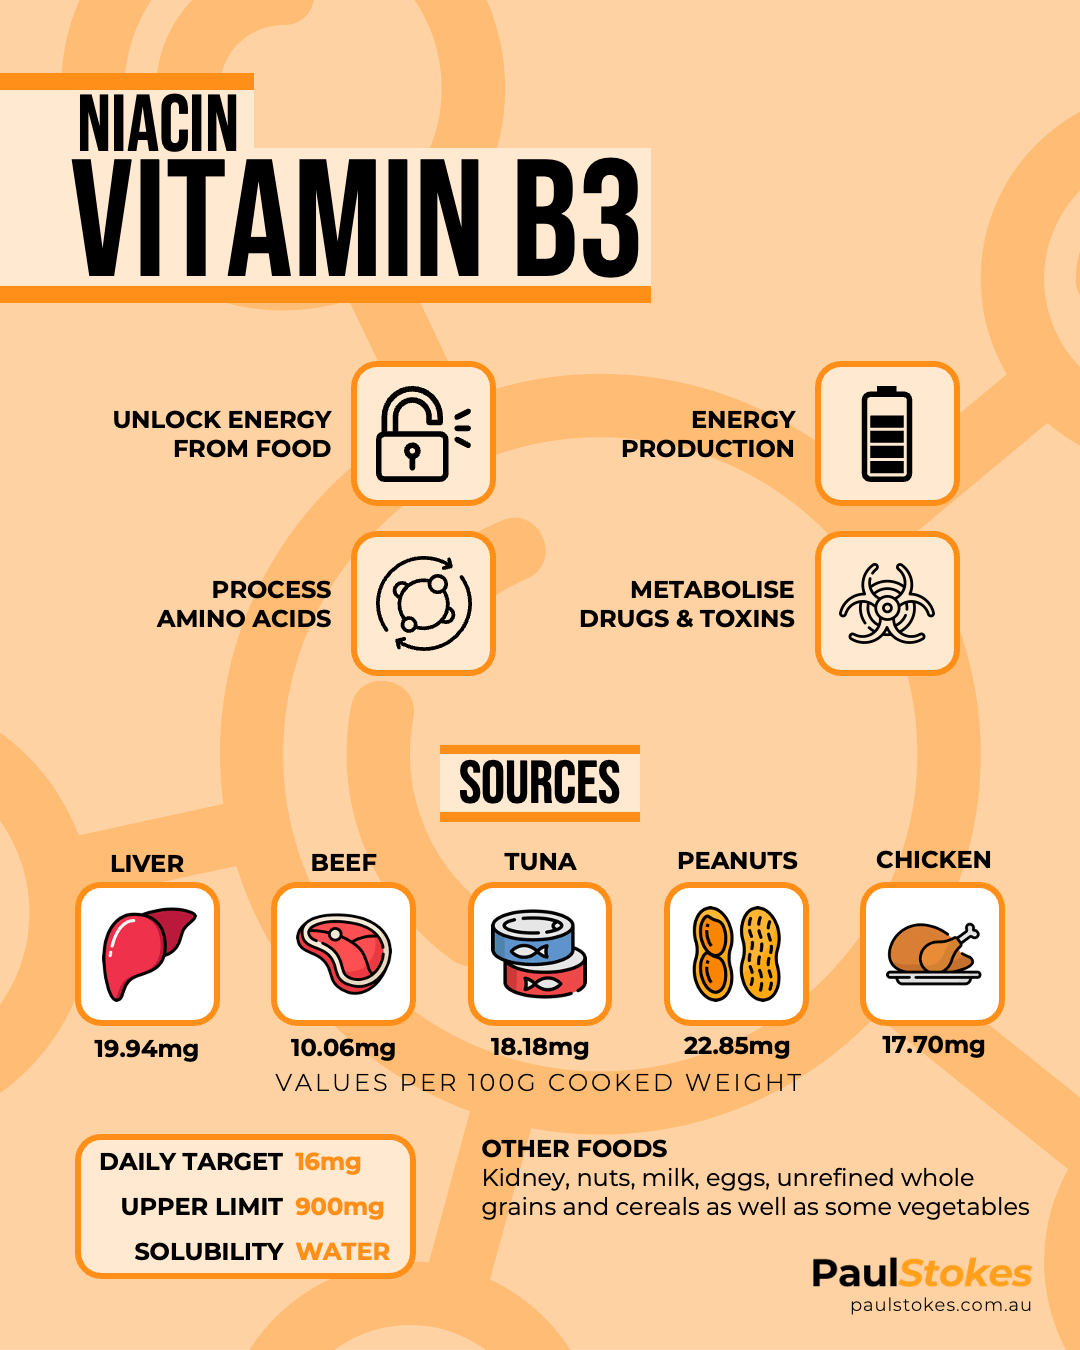 Vitamin B3 Niacin Infographic showing actions, food sources, daily requirements and solubility